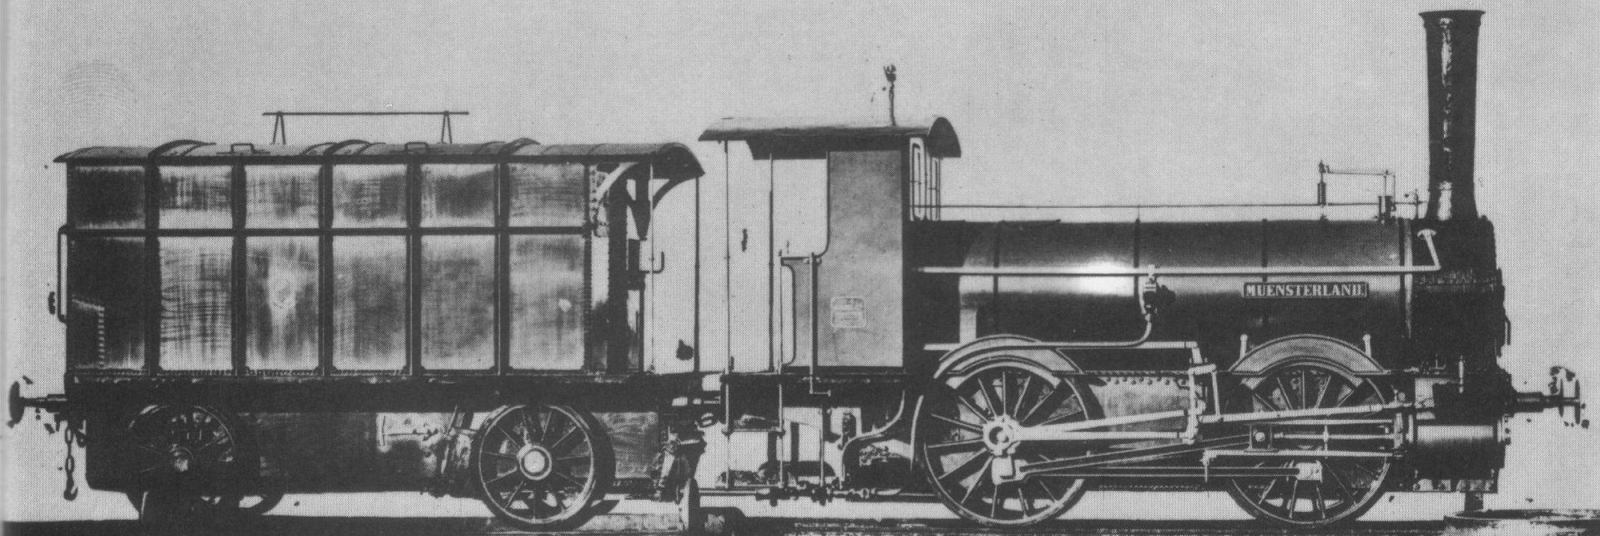 The “Münsterland” with peat tender